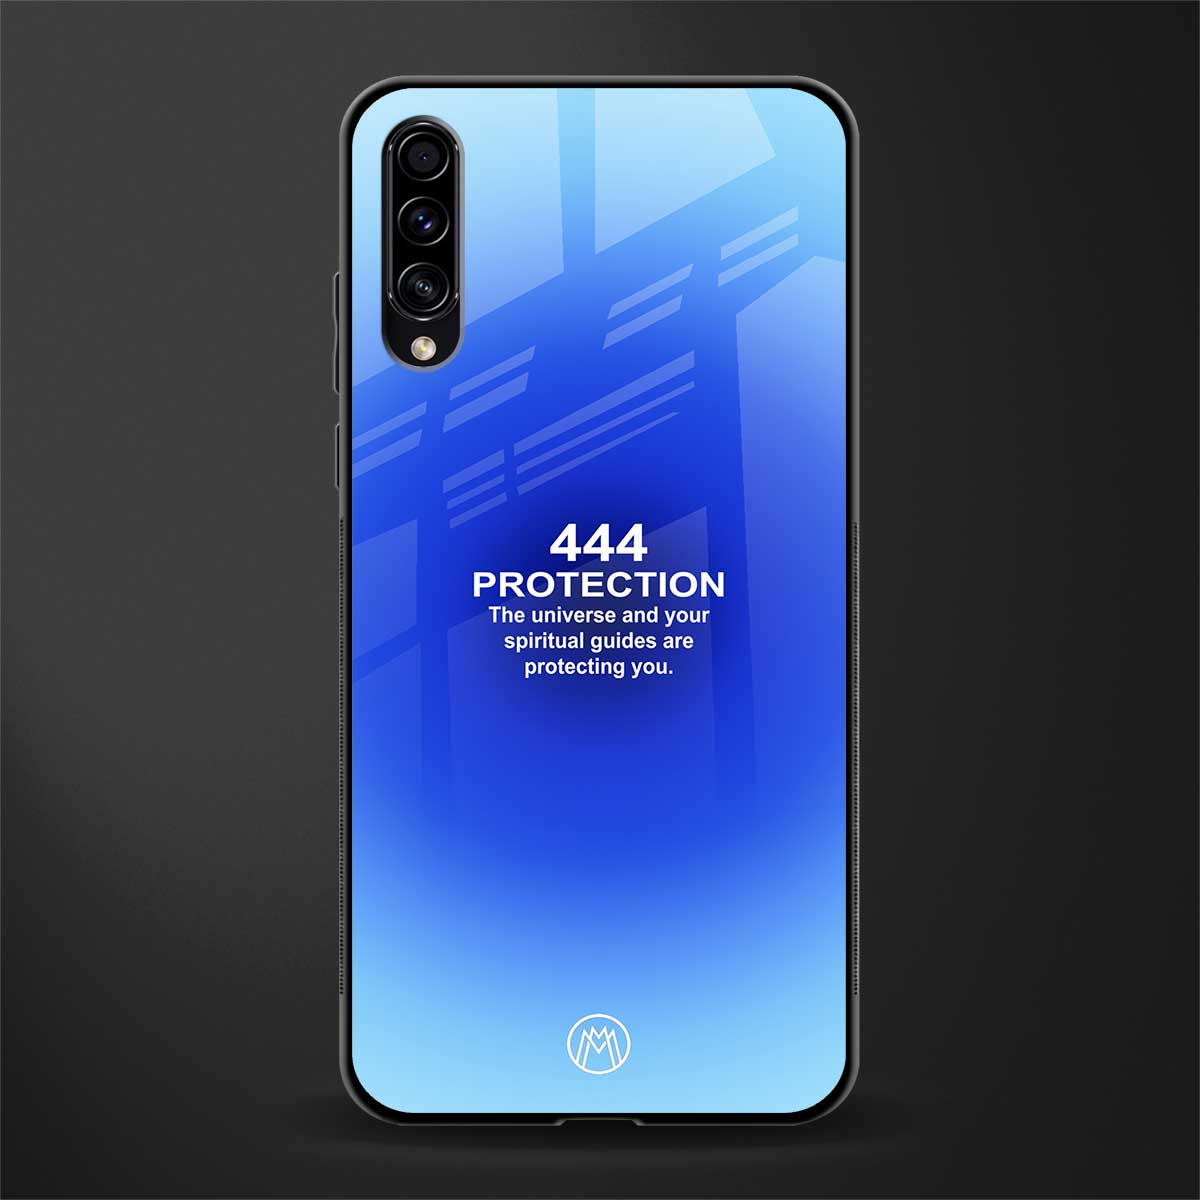 444 protection glass case for samsung galaxy a50 image